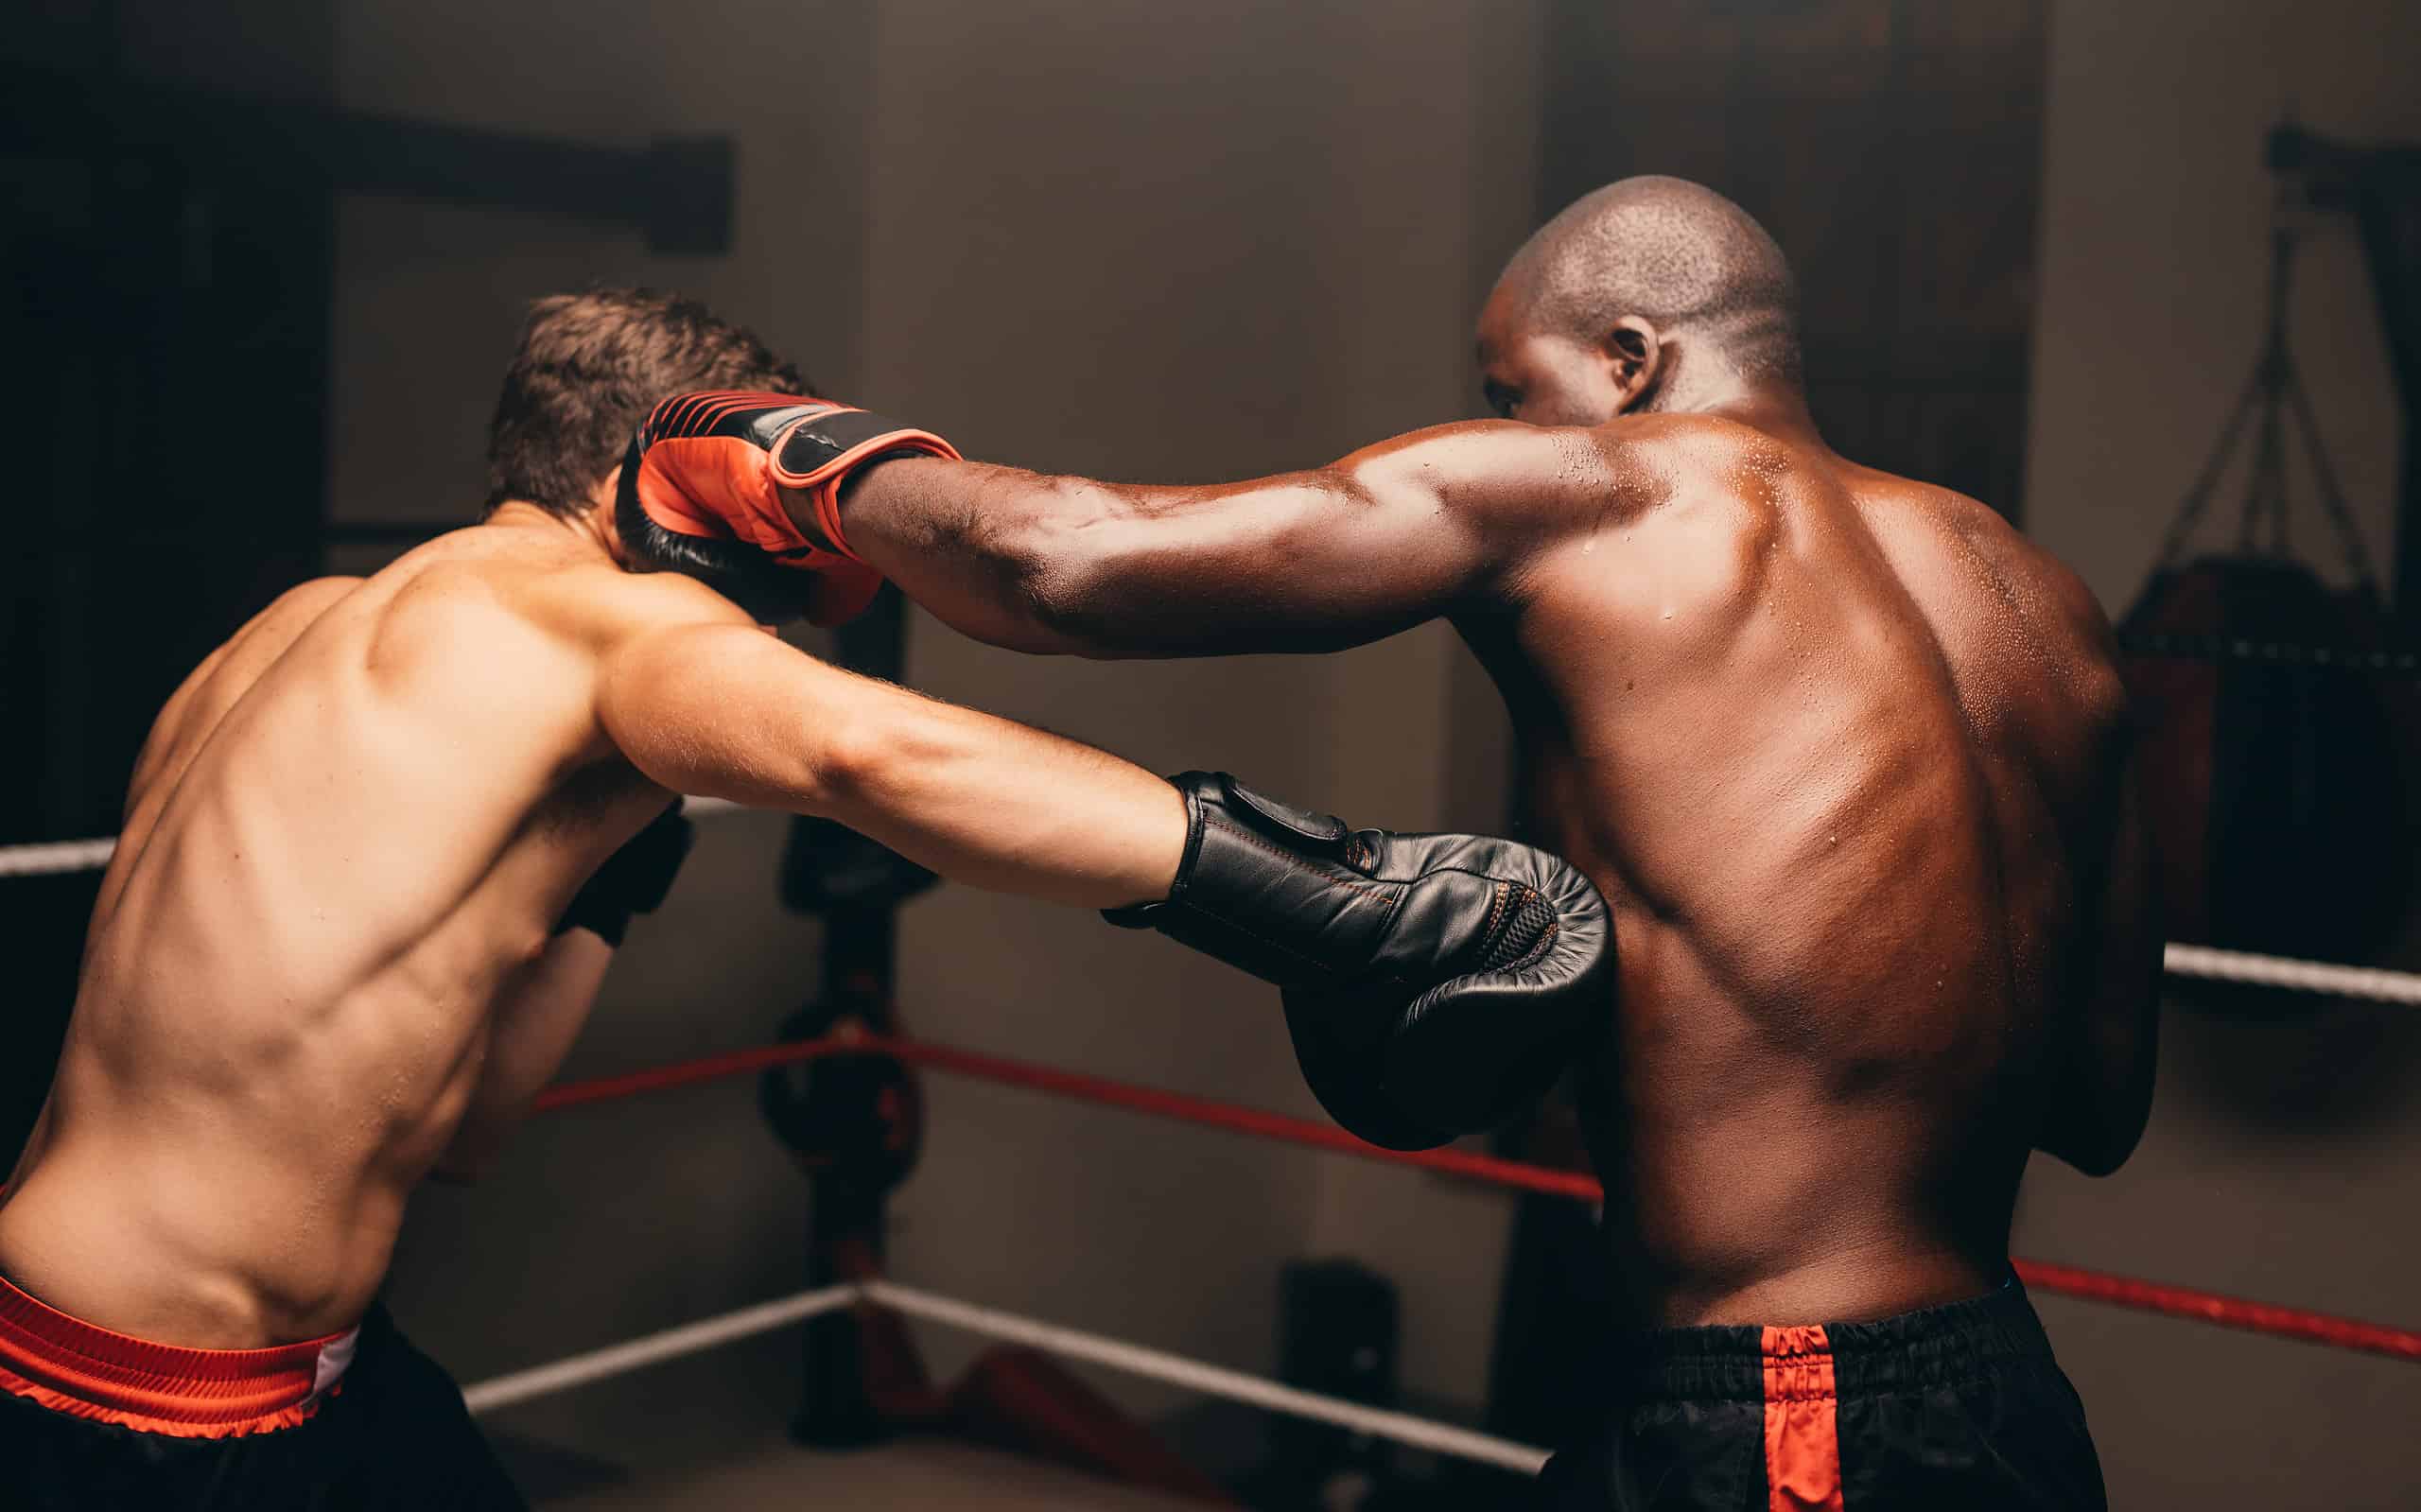 Boxing is an exciting sport, but also provides plenty of danger due to the potential for fatal blows.